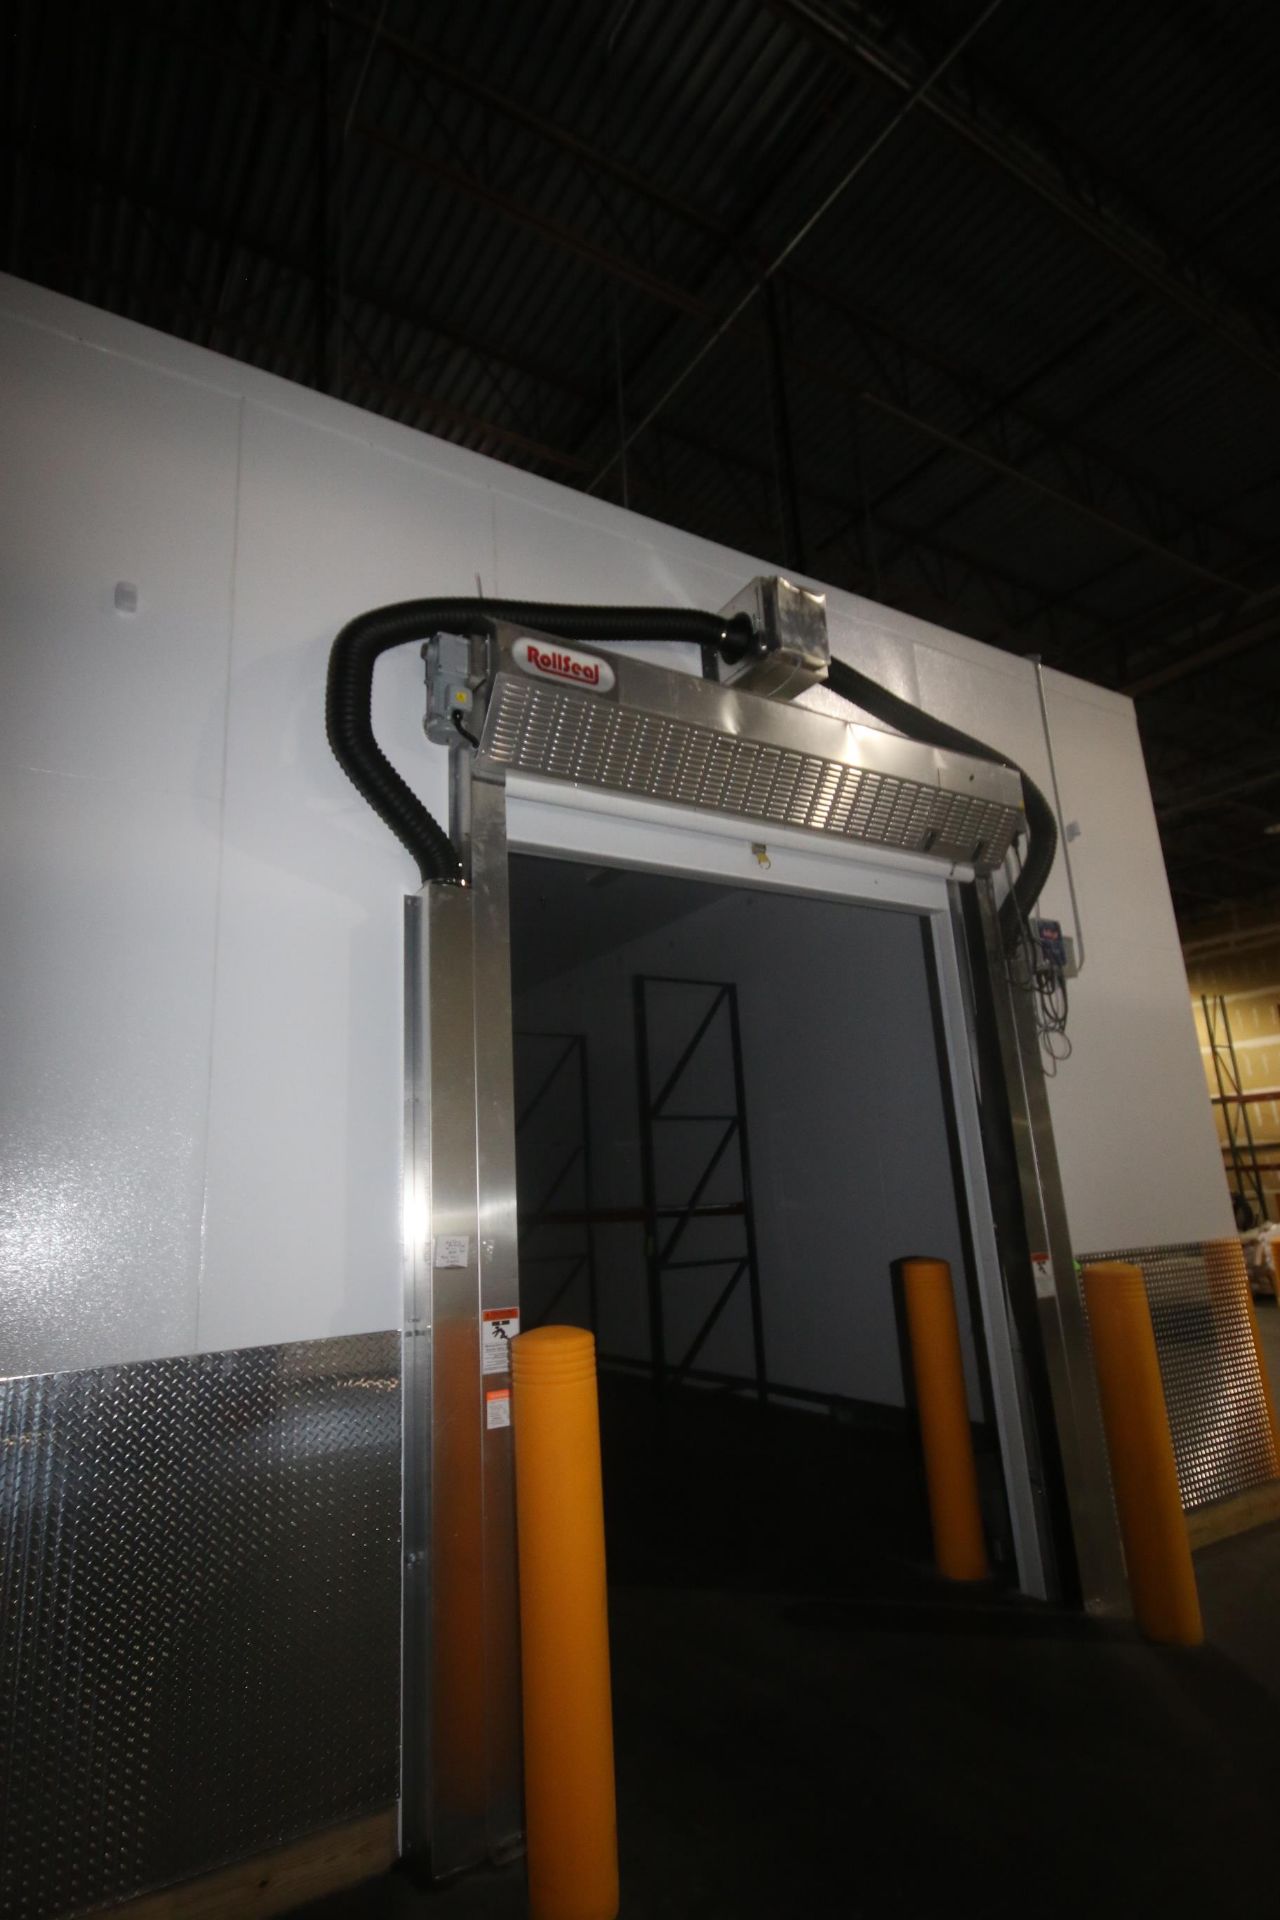 2018 RollSeal Air Tight Drive-Thru Modular Room, Overall Dims.: Aprox. 88' L x 20' W x 190" Tall, - Image 3 of 24